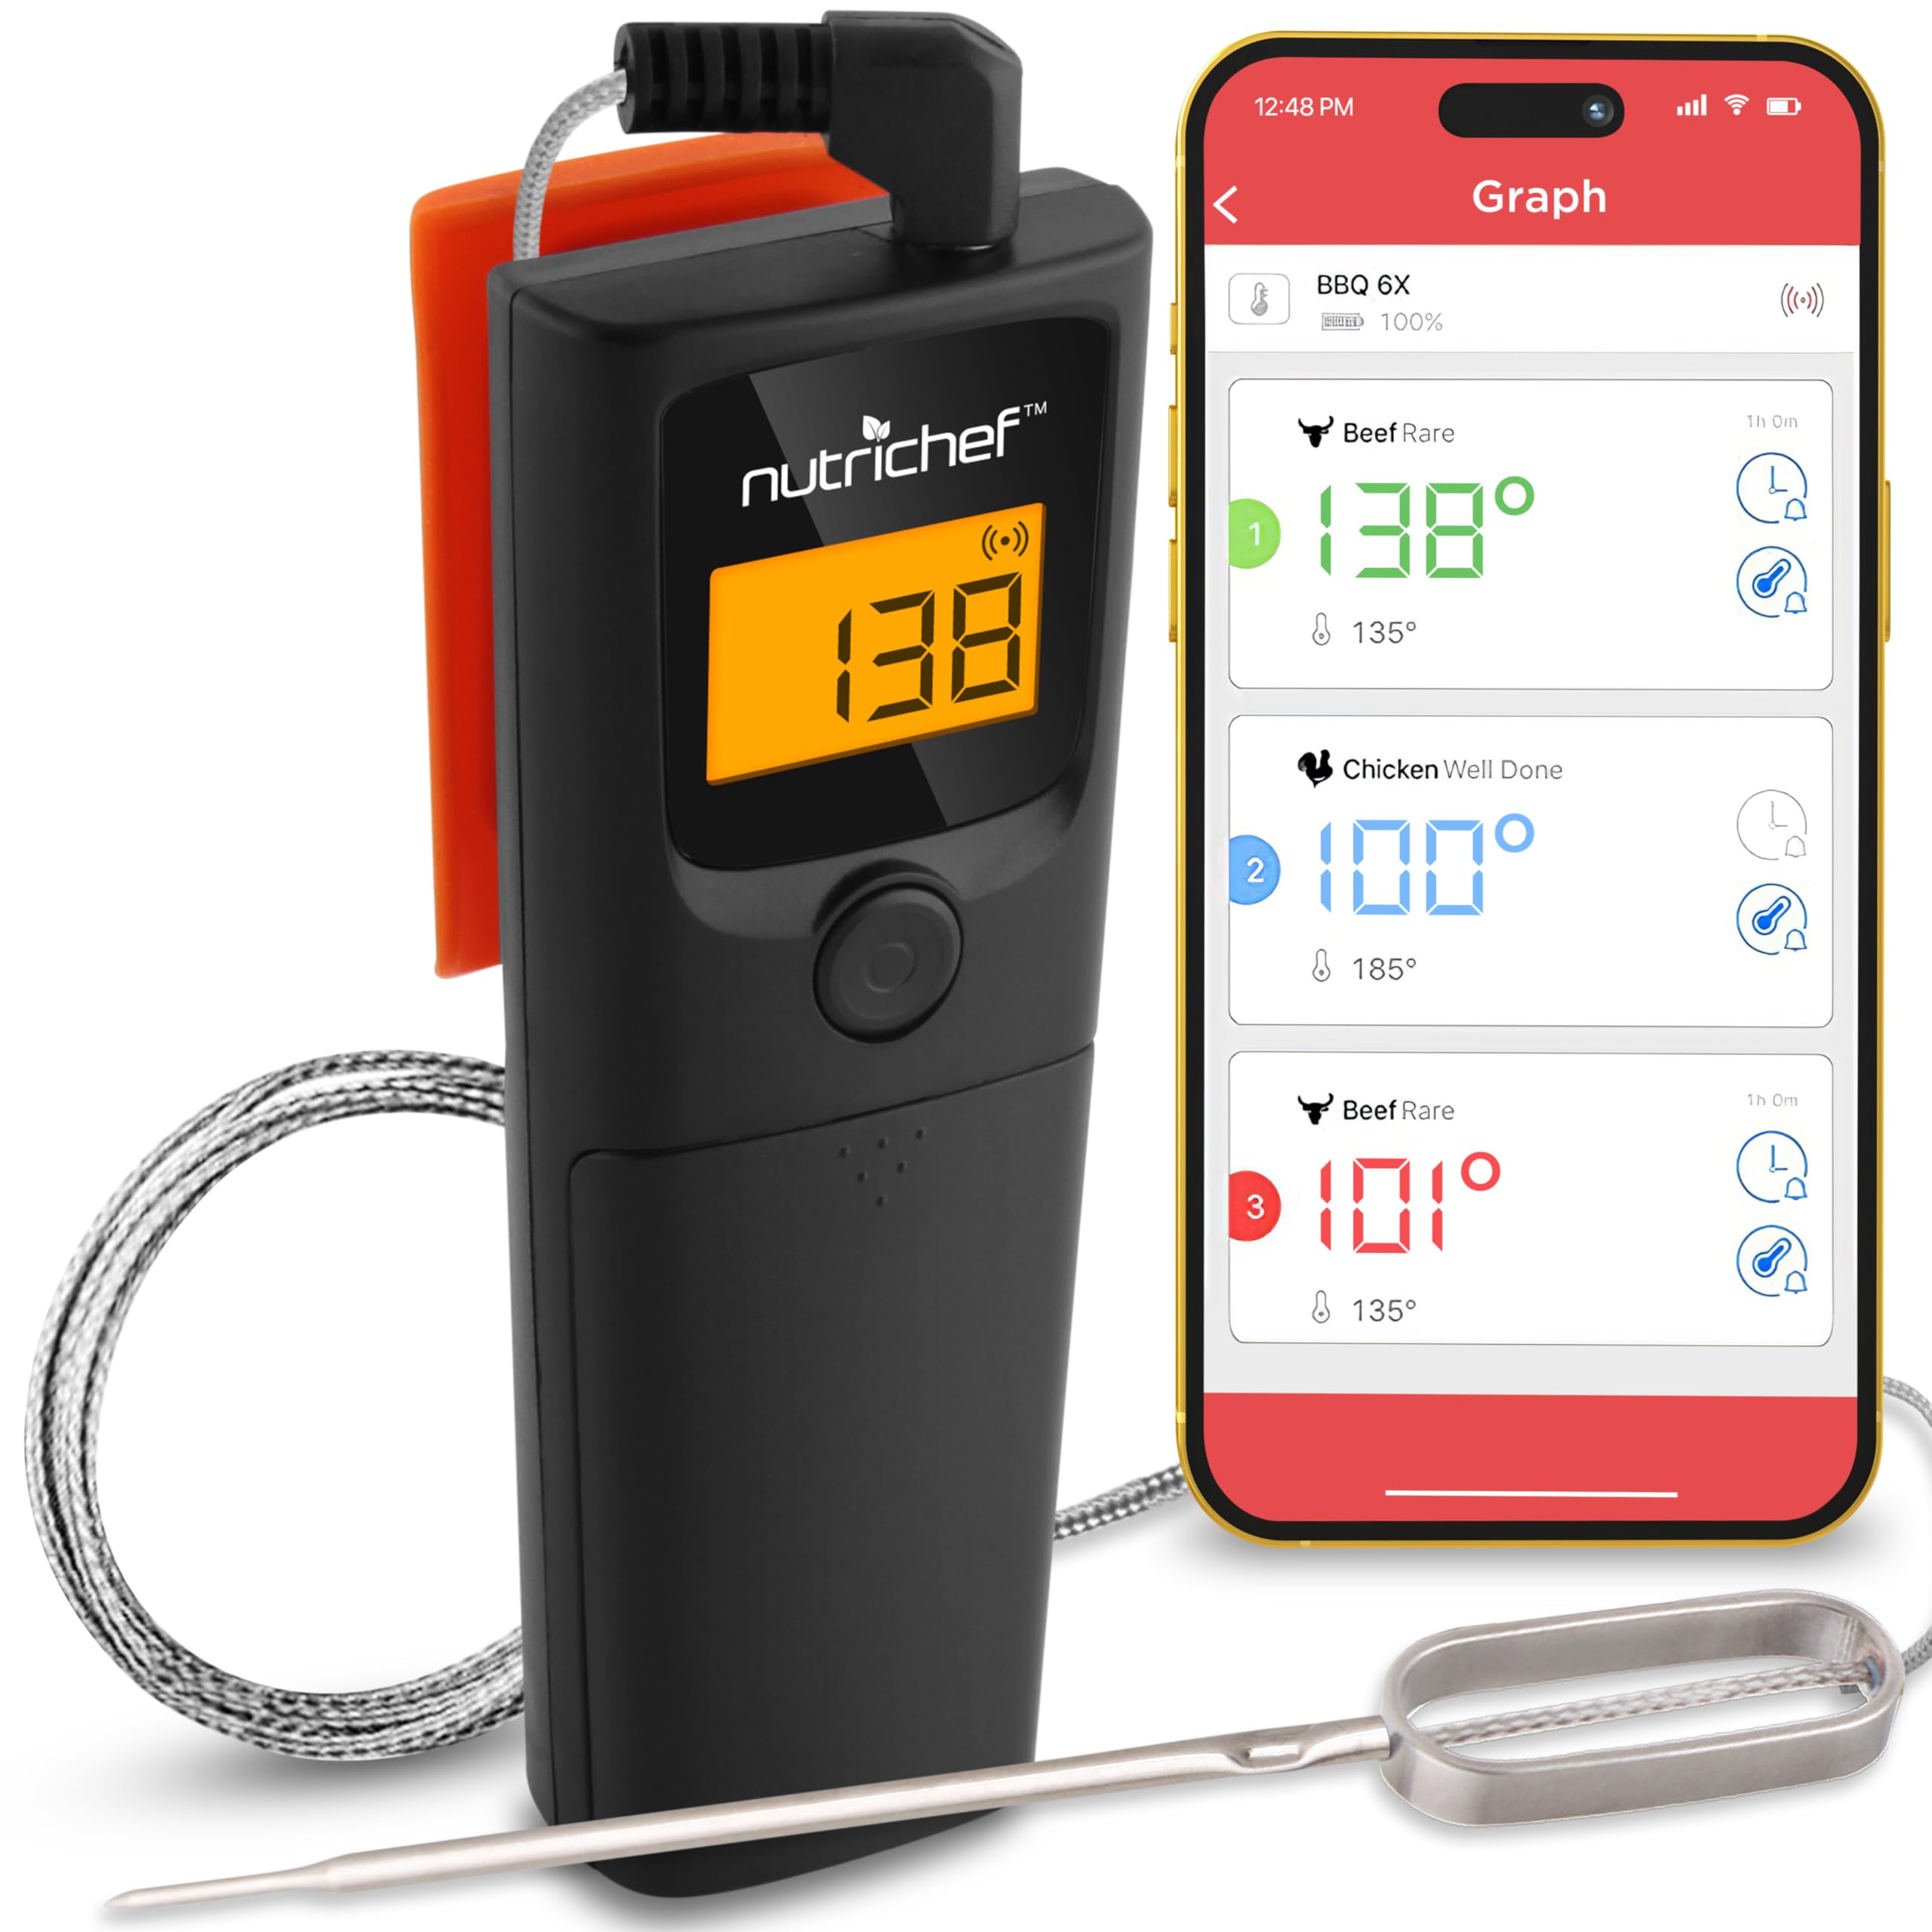 NutriChef PWIRBBQ90 Bluetooth Meat Thermometer - for Grilling Smart Wireless Kitchen Remote Instant Read BBQ Temperature Probe for Grill, Oven, Smoker, Cooking, Smoking Food w/Digital LCD Display